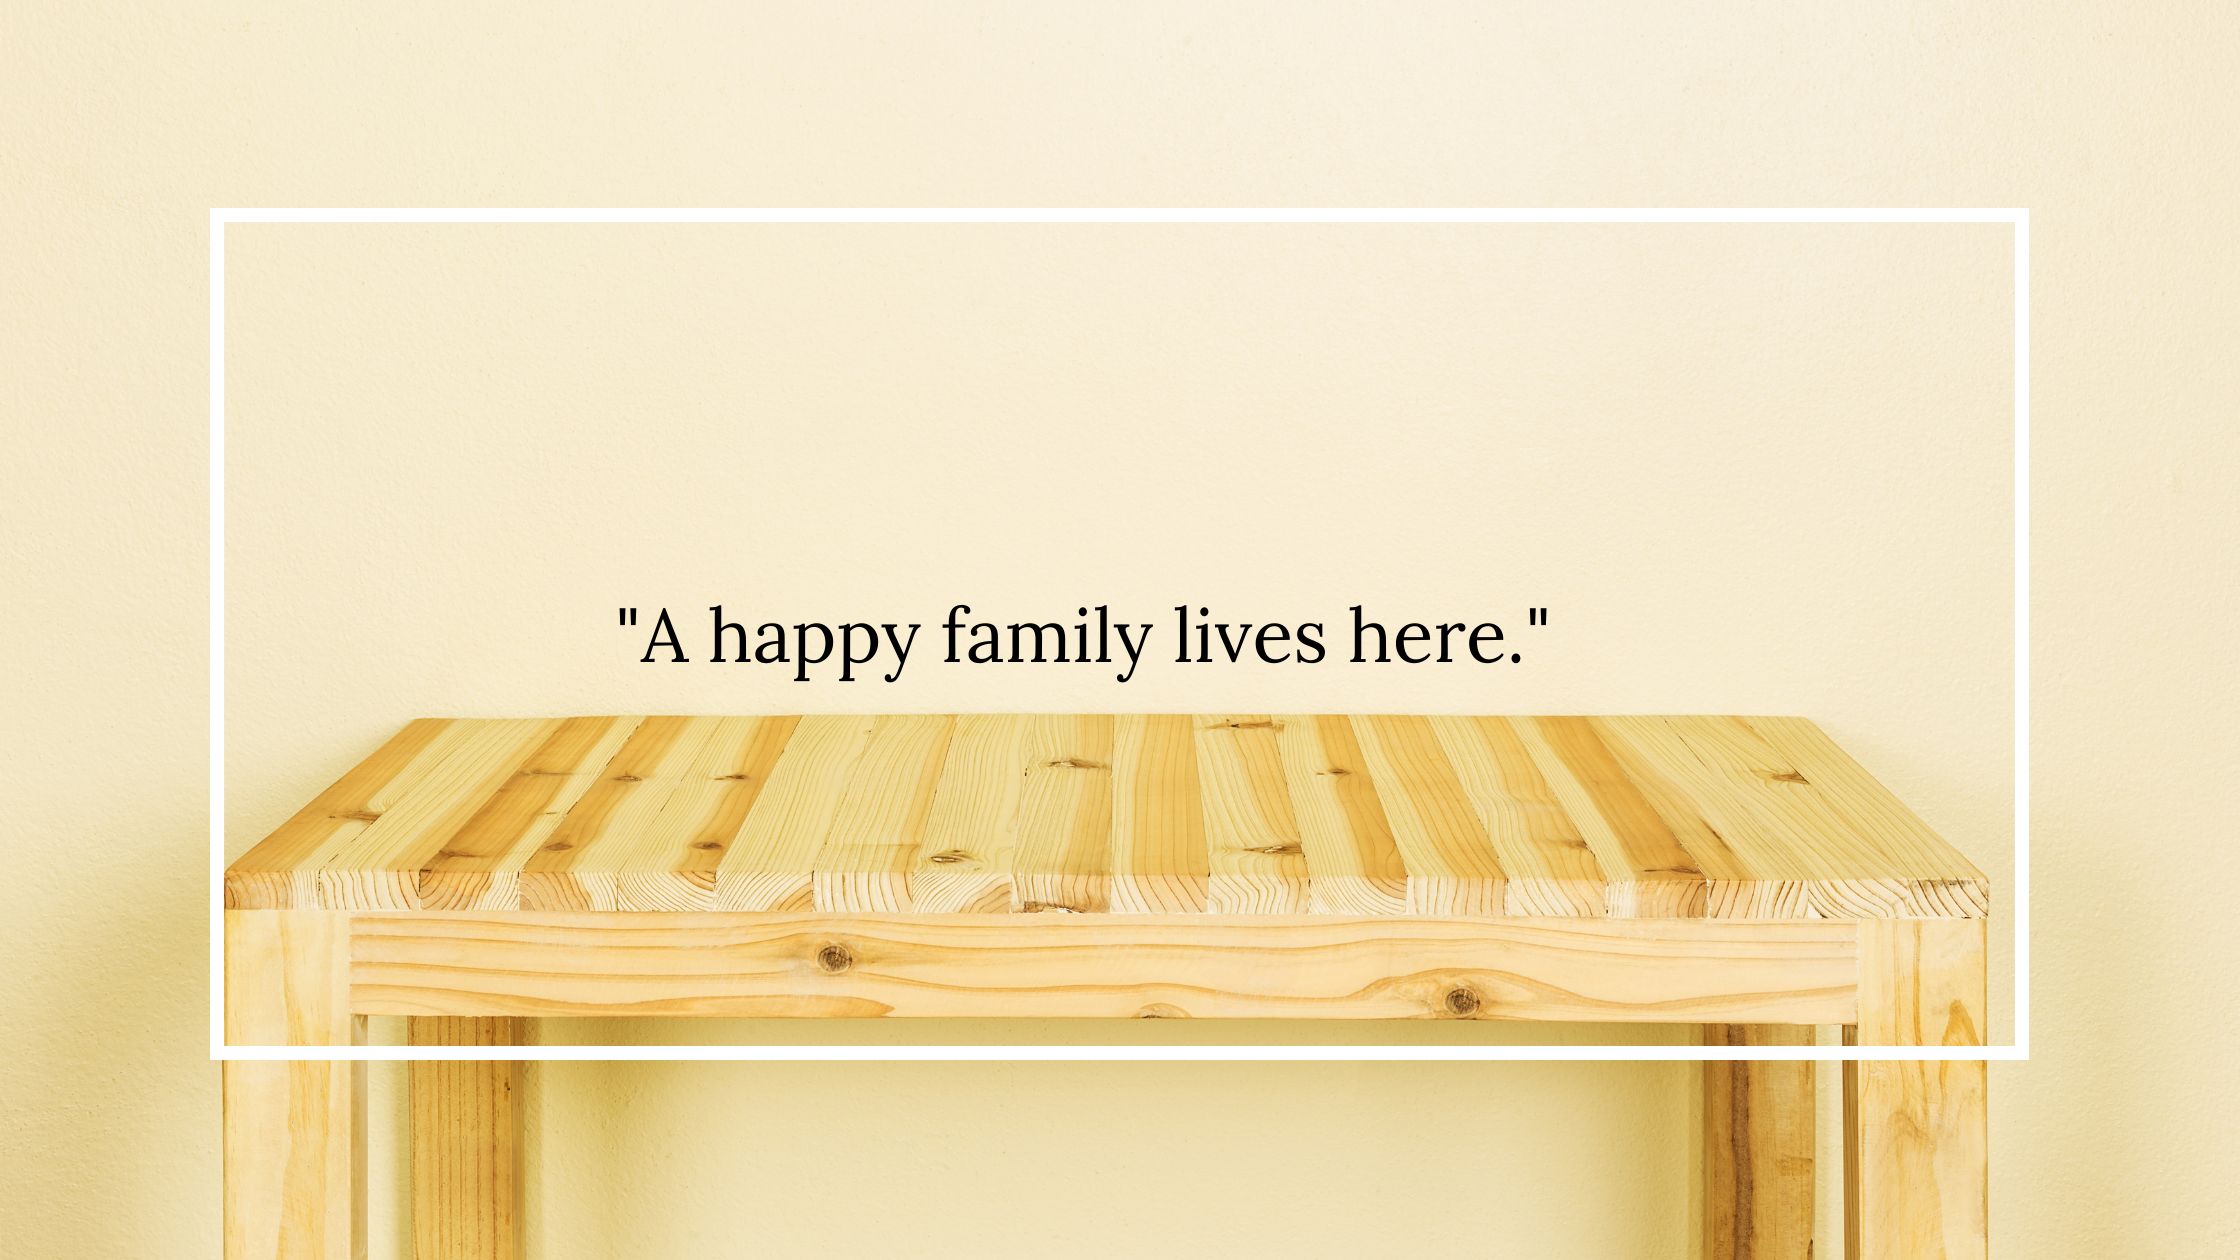 A happy family lives here.